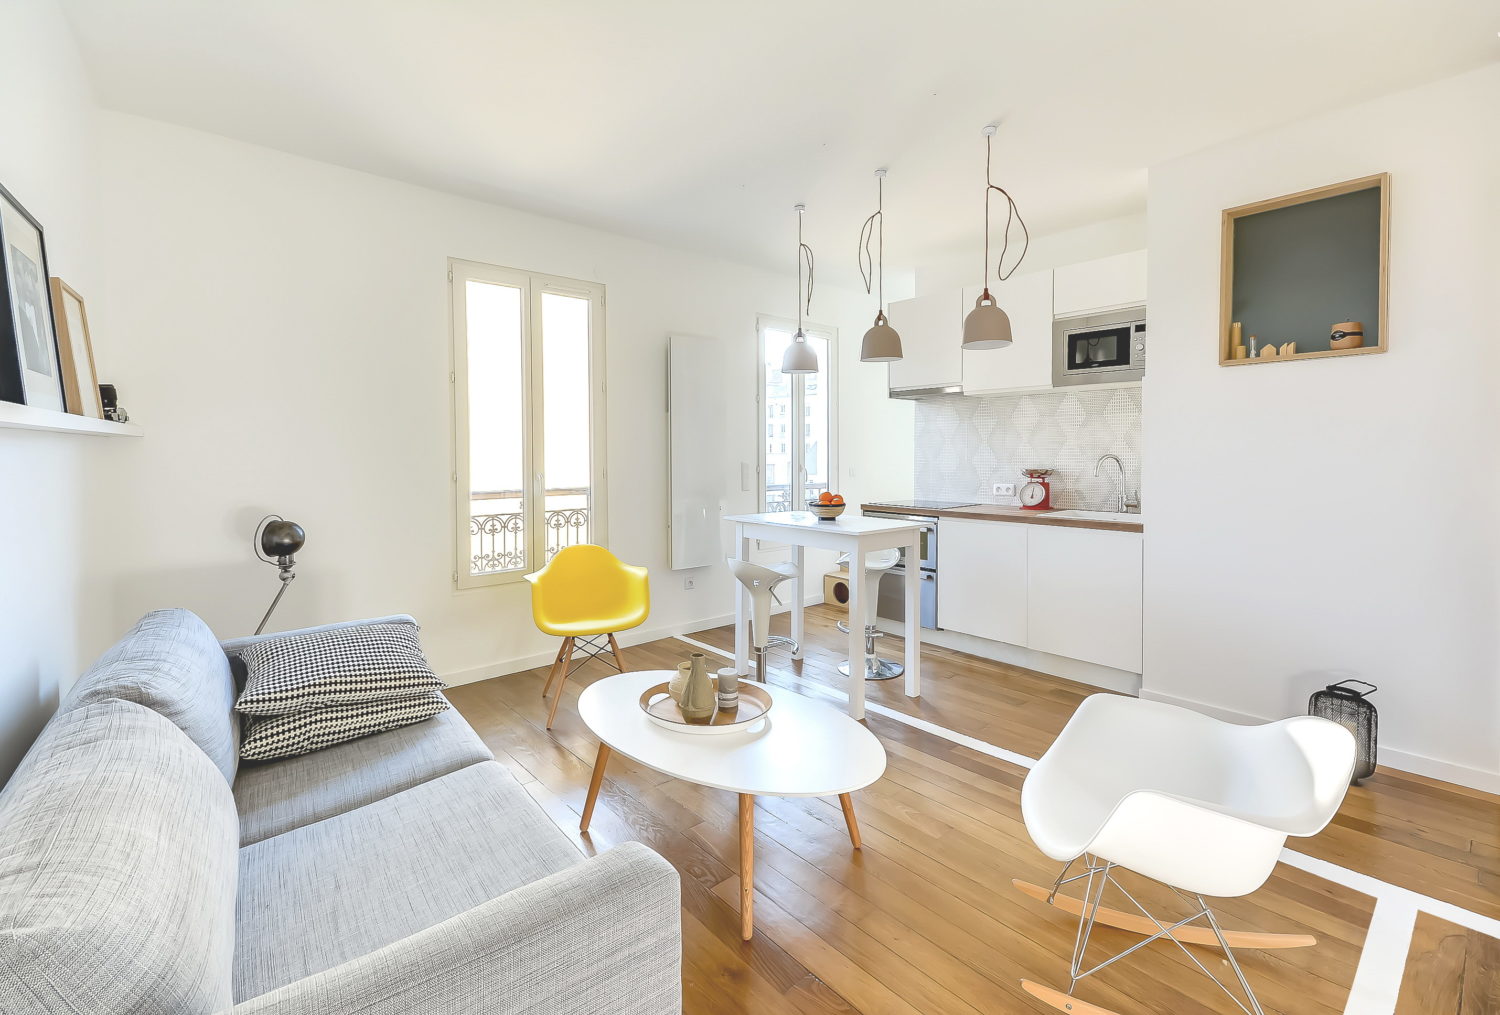 Tiny flat in Paris by Richard Guilbault